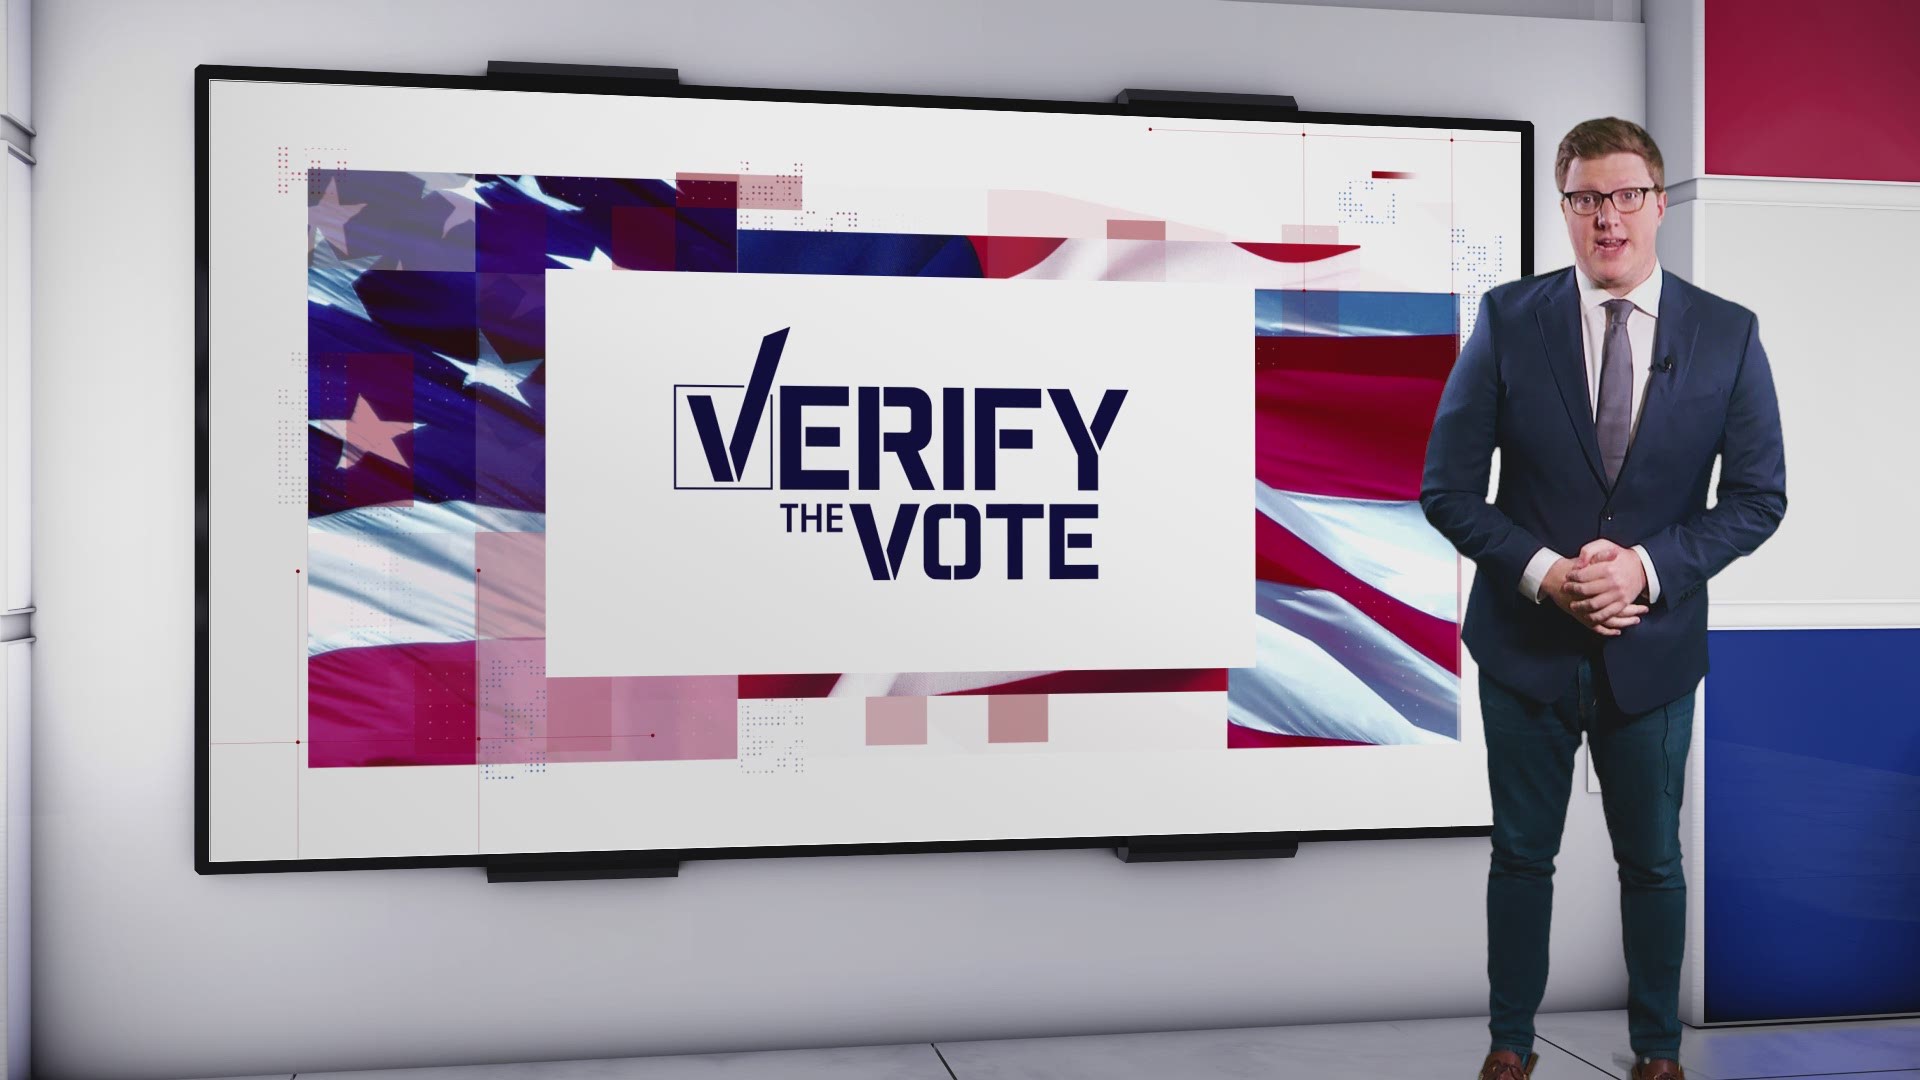 The VERIFY team broke down the false claims made in Trump's speech on Thursday about the election.